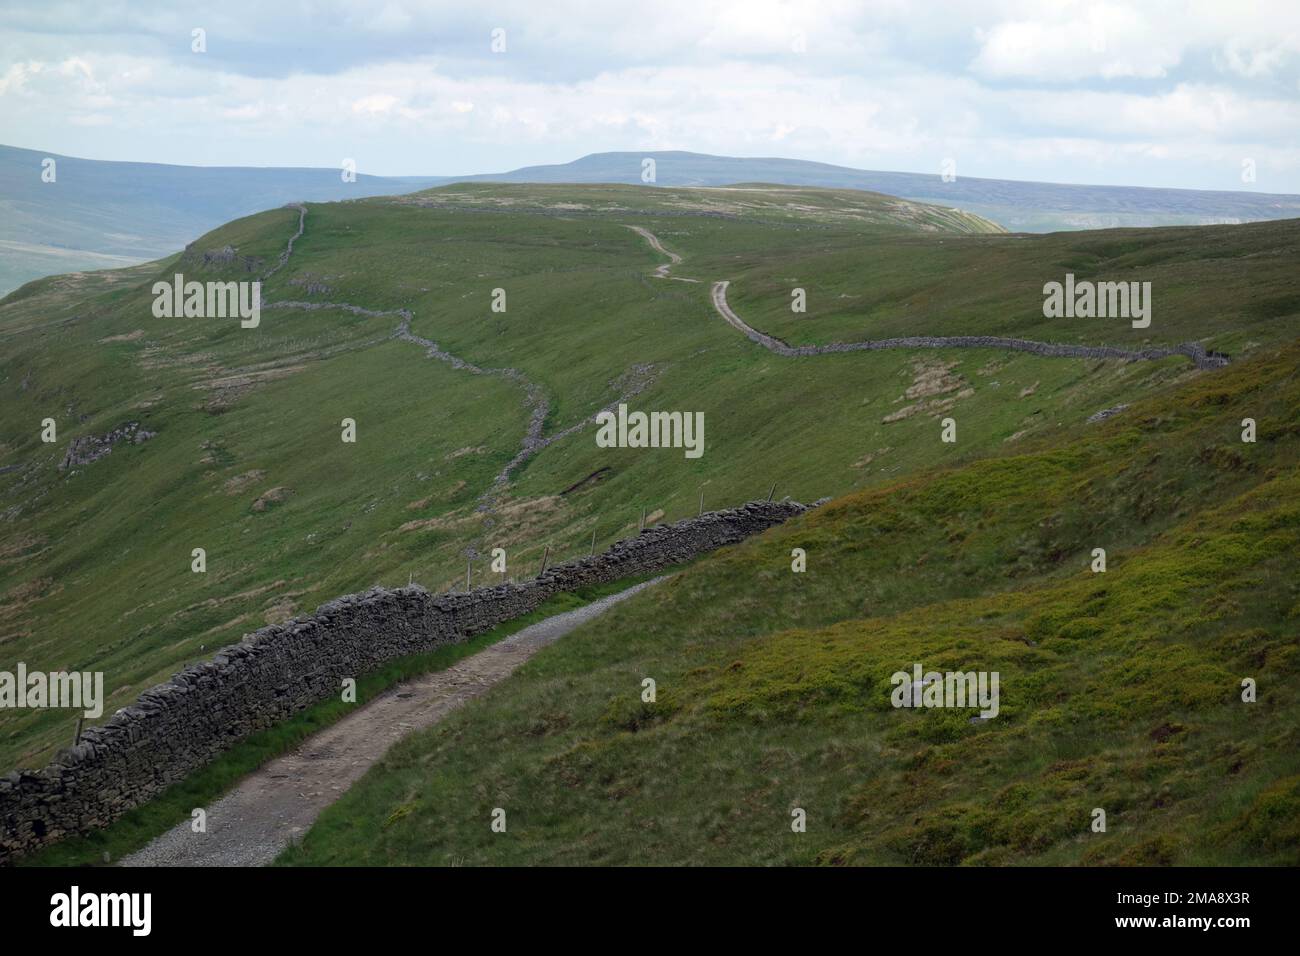 Looking to 'Ten End' from the Pennine Way/West Cam Road near 'Dodd Fell' near Hawes in Wensleydale, Yorkshire Dales National Park, England, UK. Stock Photo